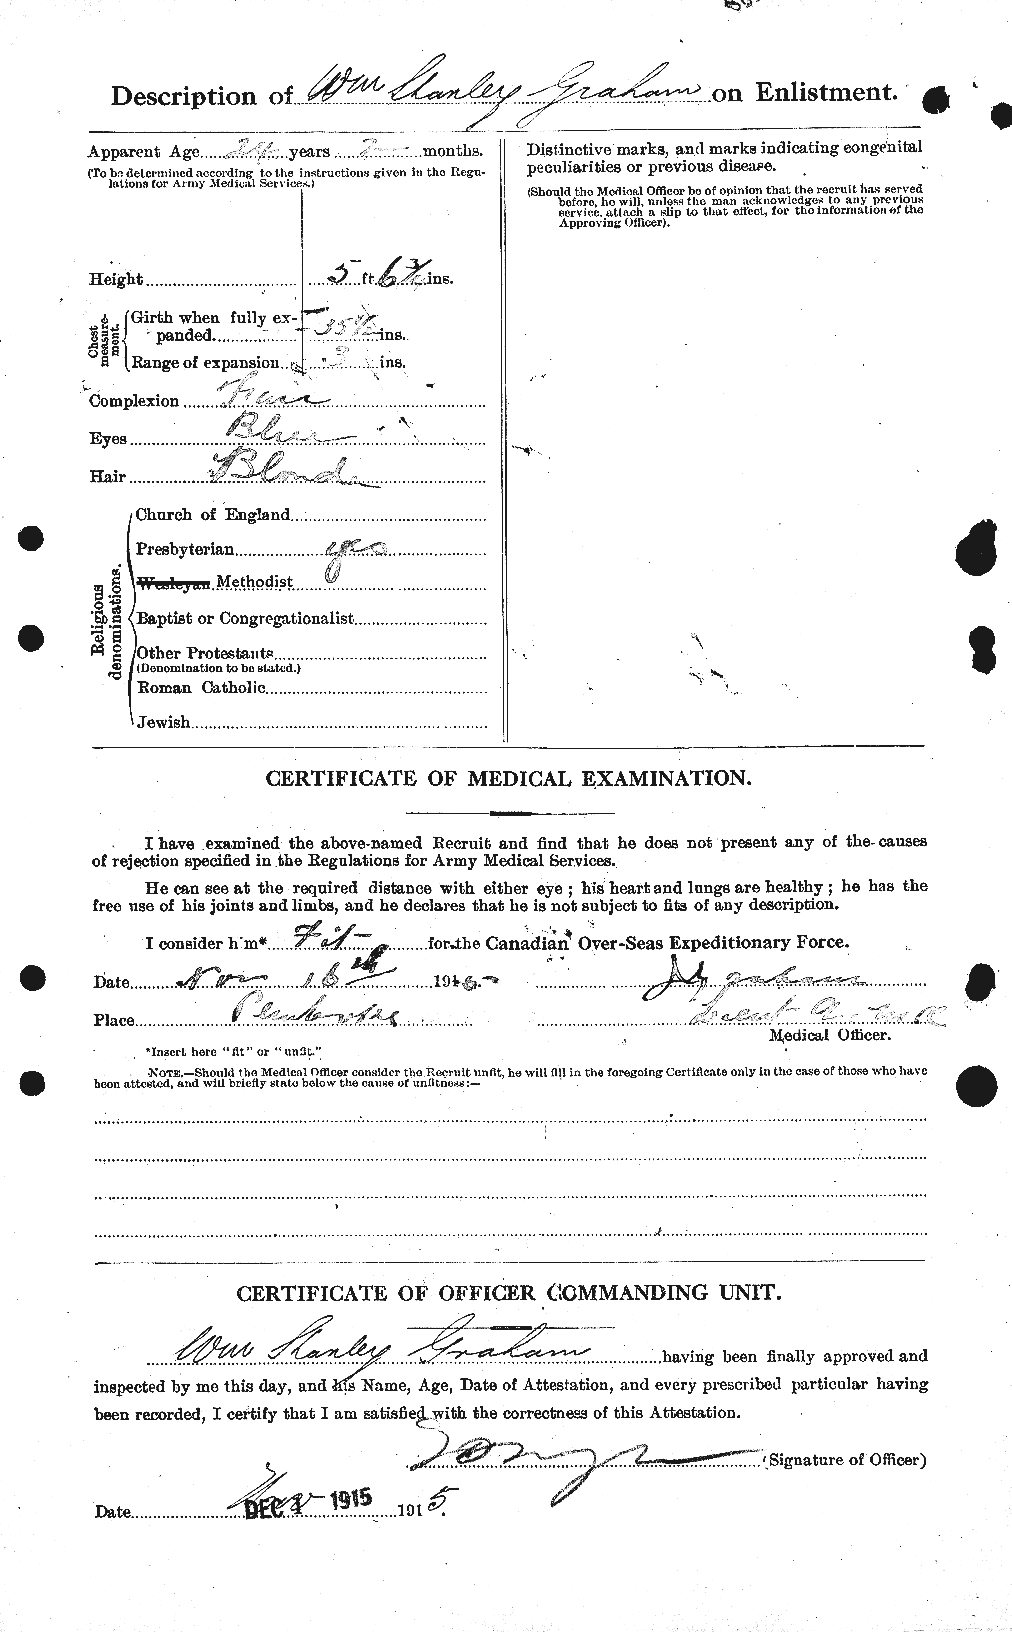 Personnel Records of the First World War - CEF 358042b